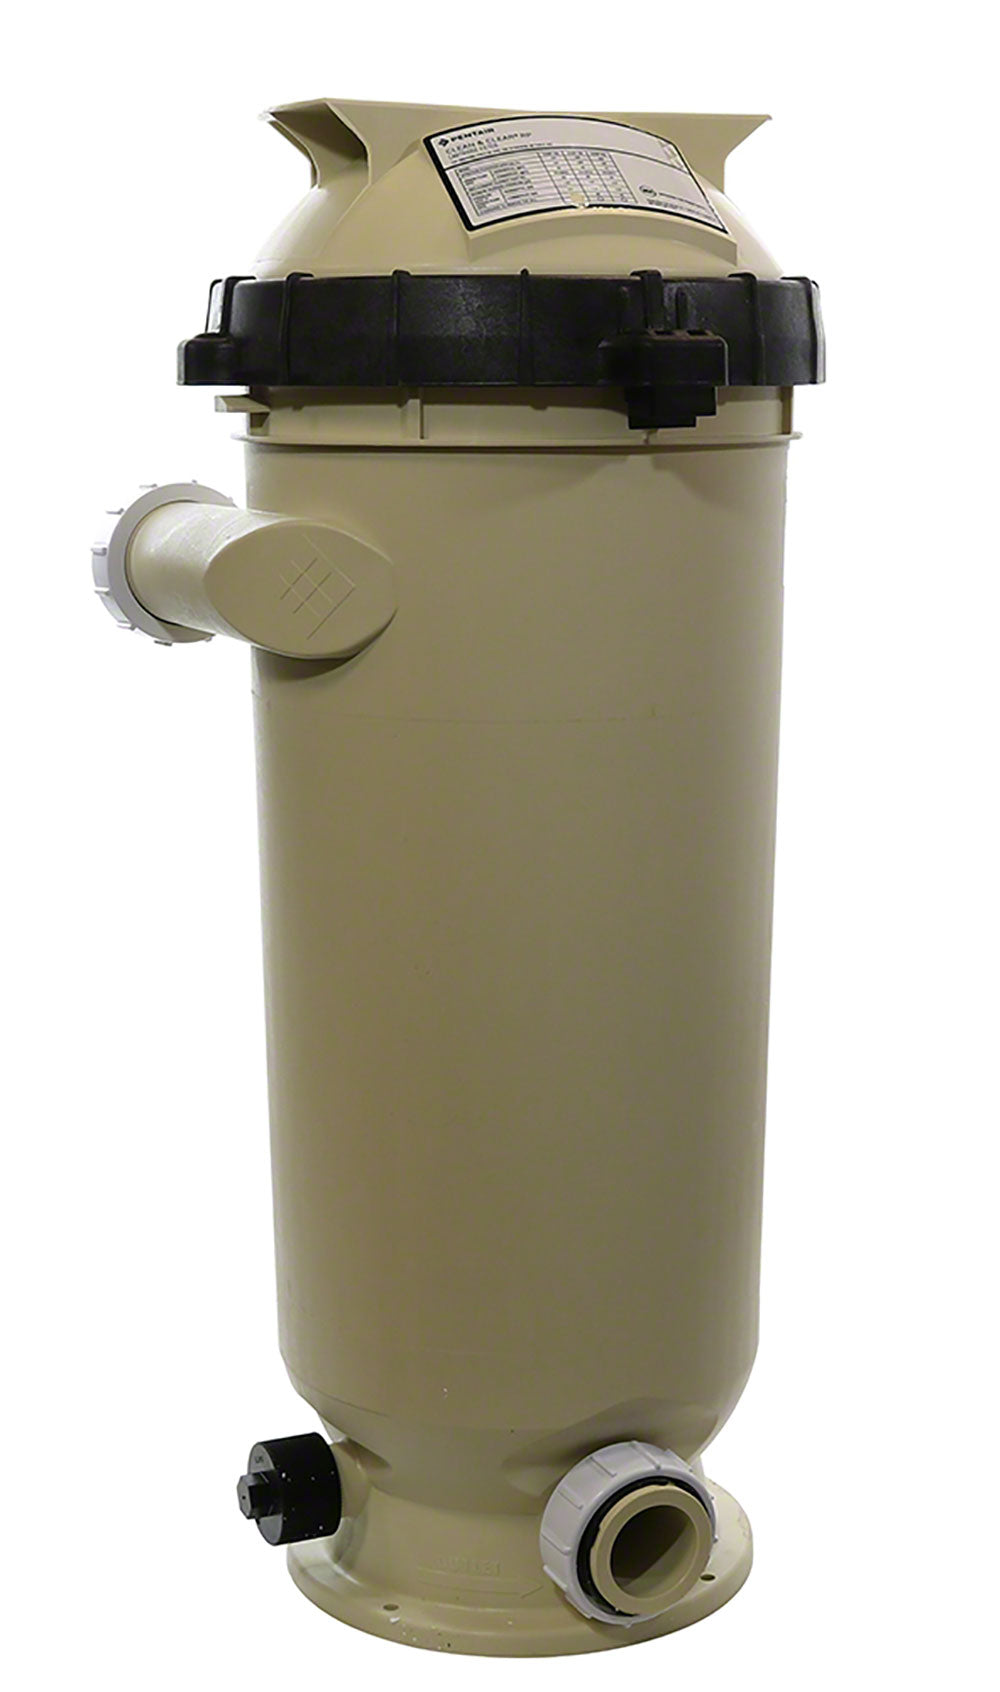 Clean and Clear RP CCRP100 EC Cartridge Filter 100 Square Feet - 2 Inch